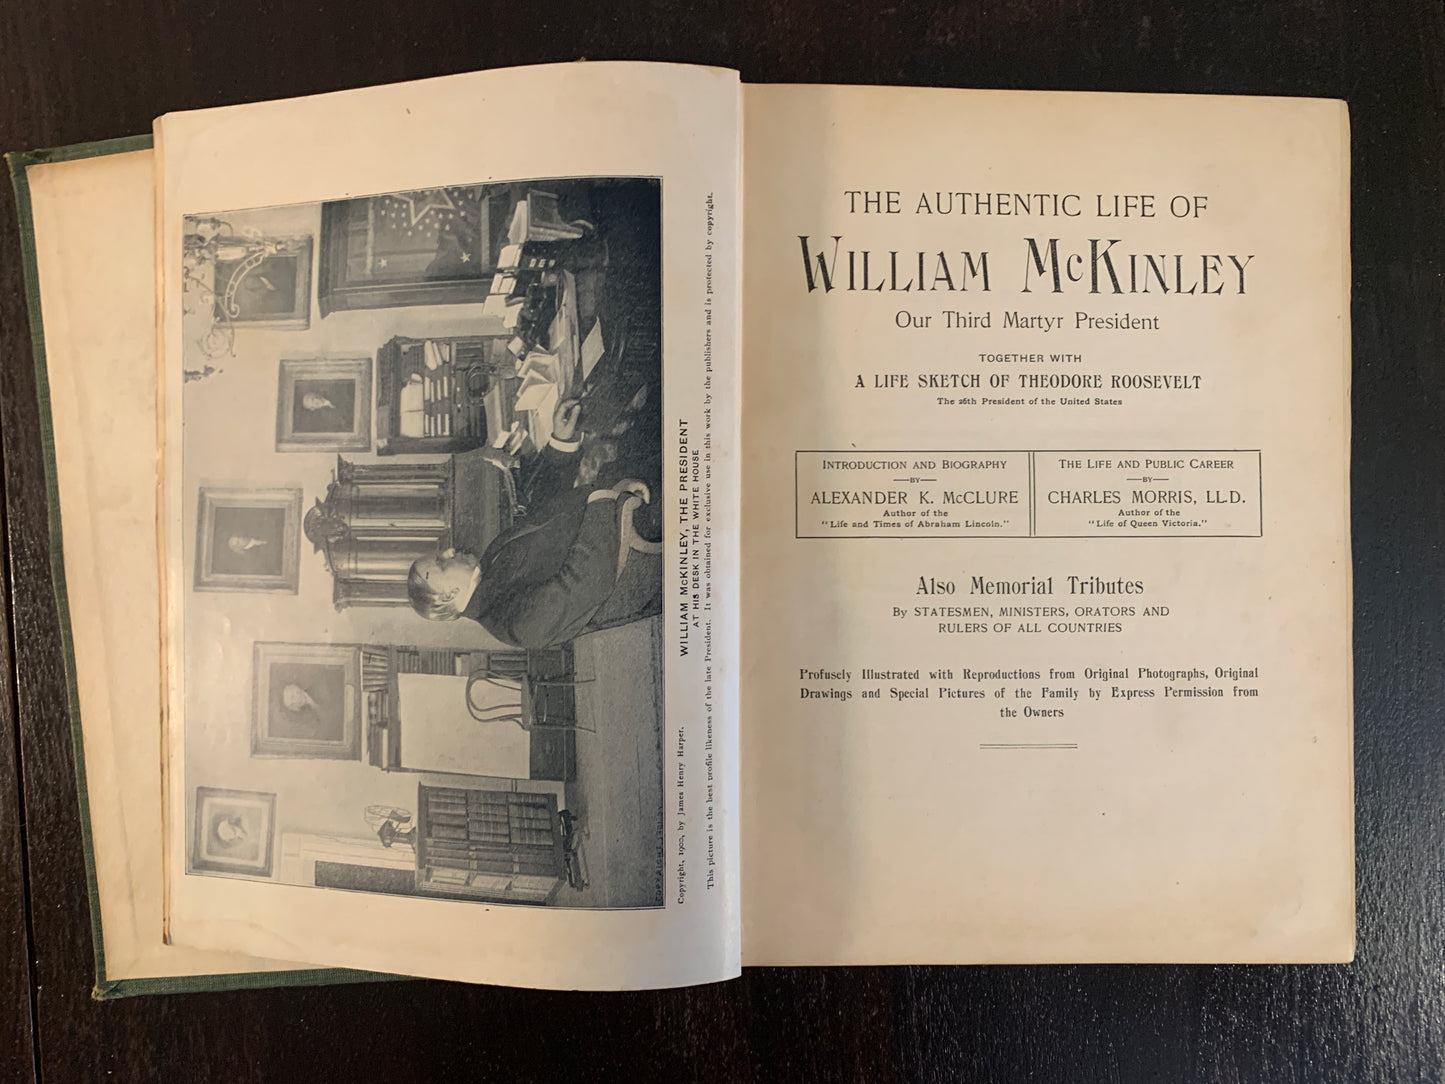 The Authentic Life of William McKinley: Our Third Martyr President with companion book